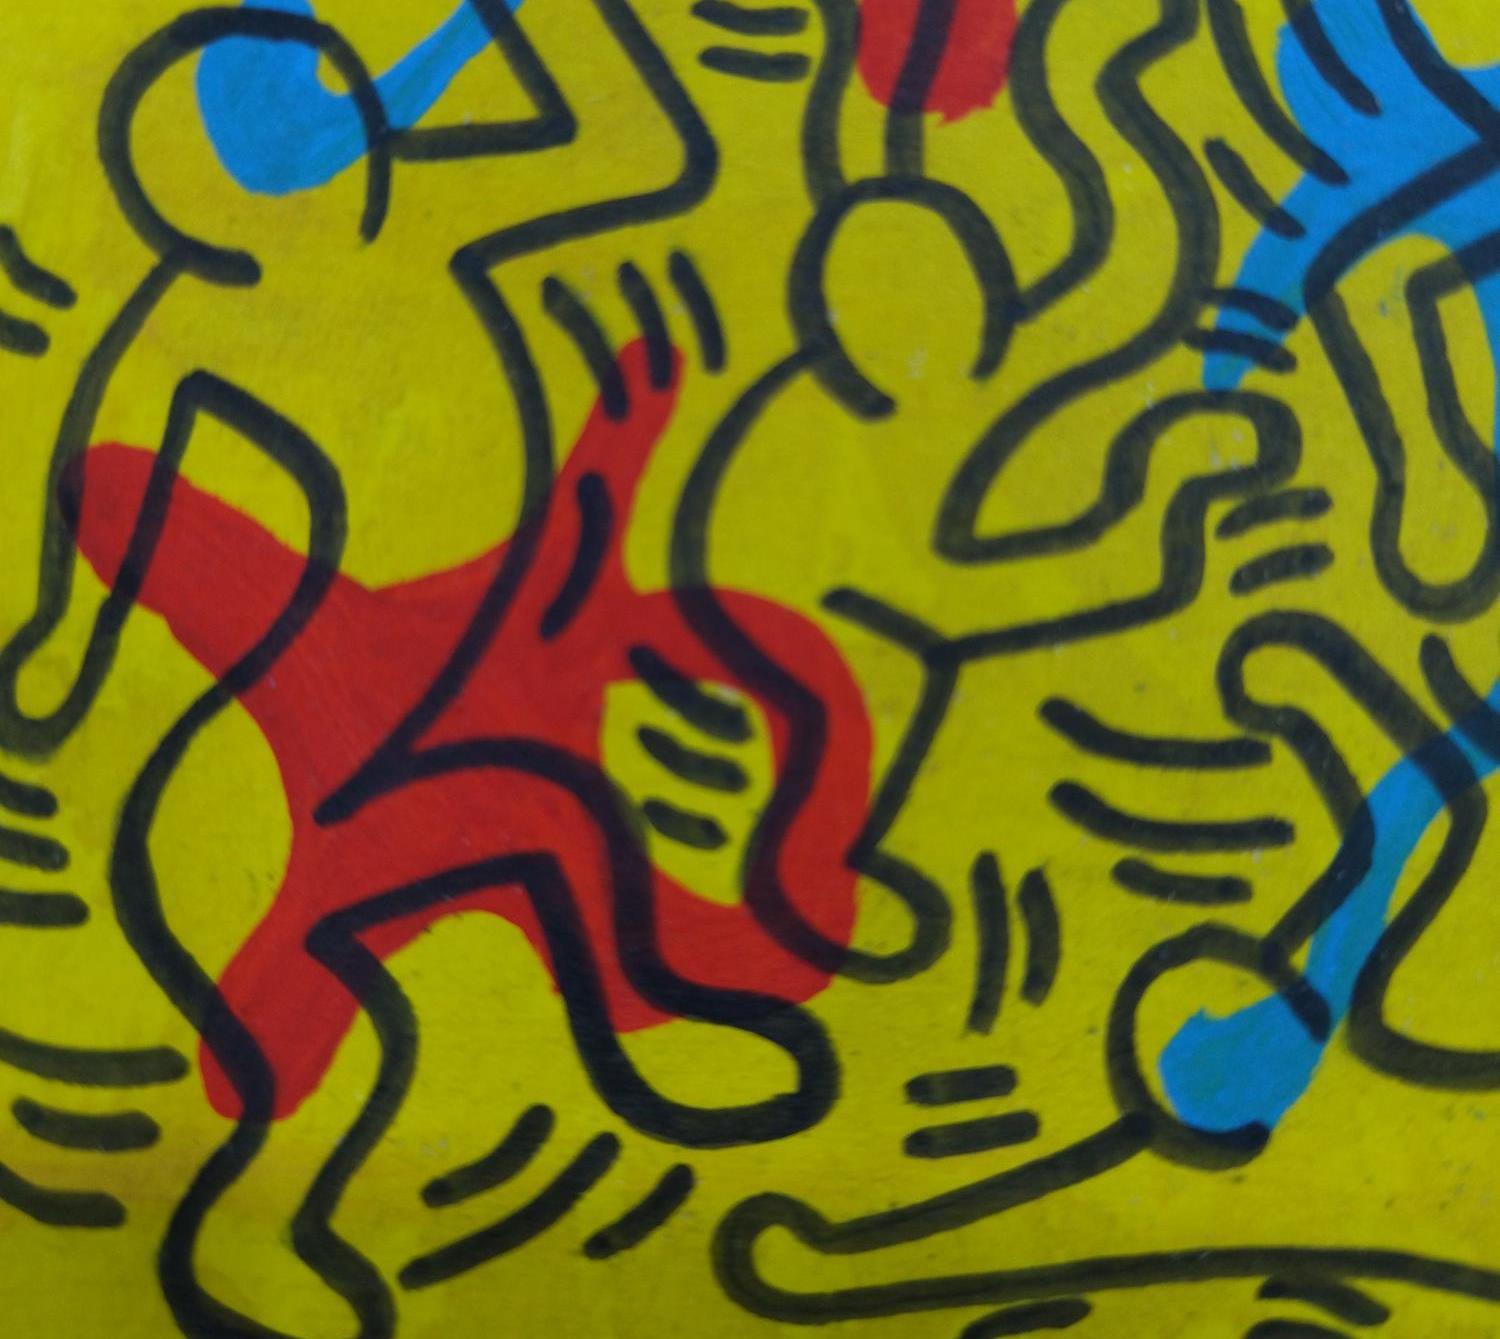 original card. 8.5 x 13.5 cm - Contemporary Painting by Keith Haring